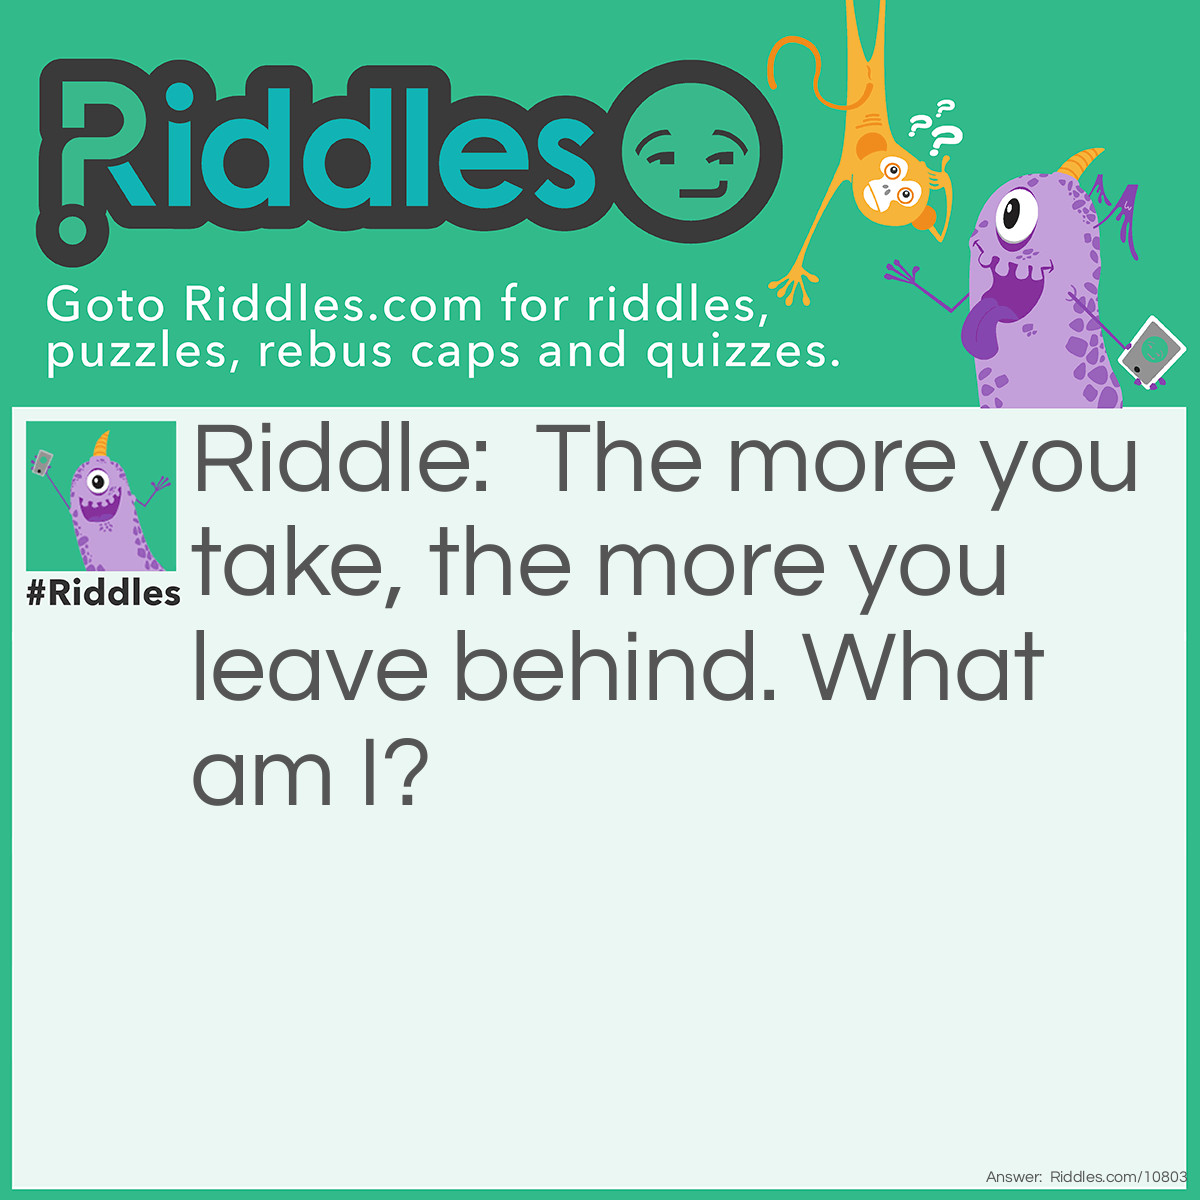 Riddle: The more you take, the more you leave behind. What am I? Answer: Footsteps.